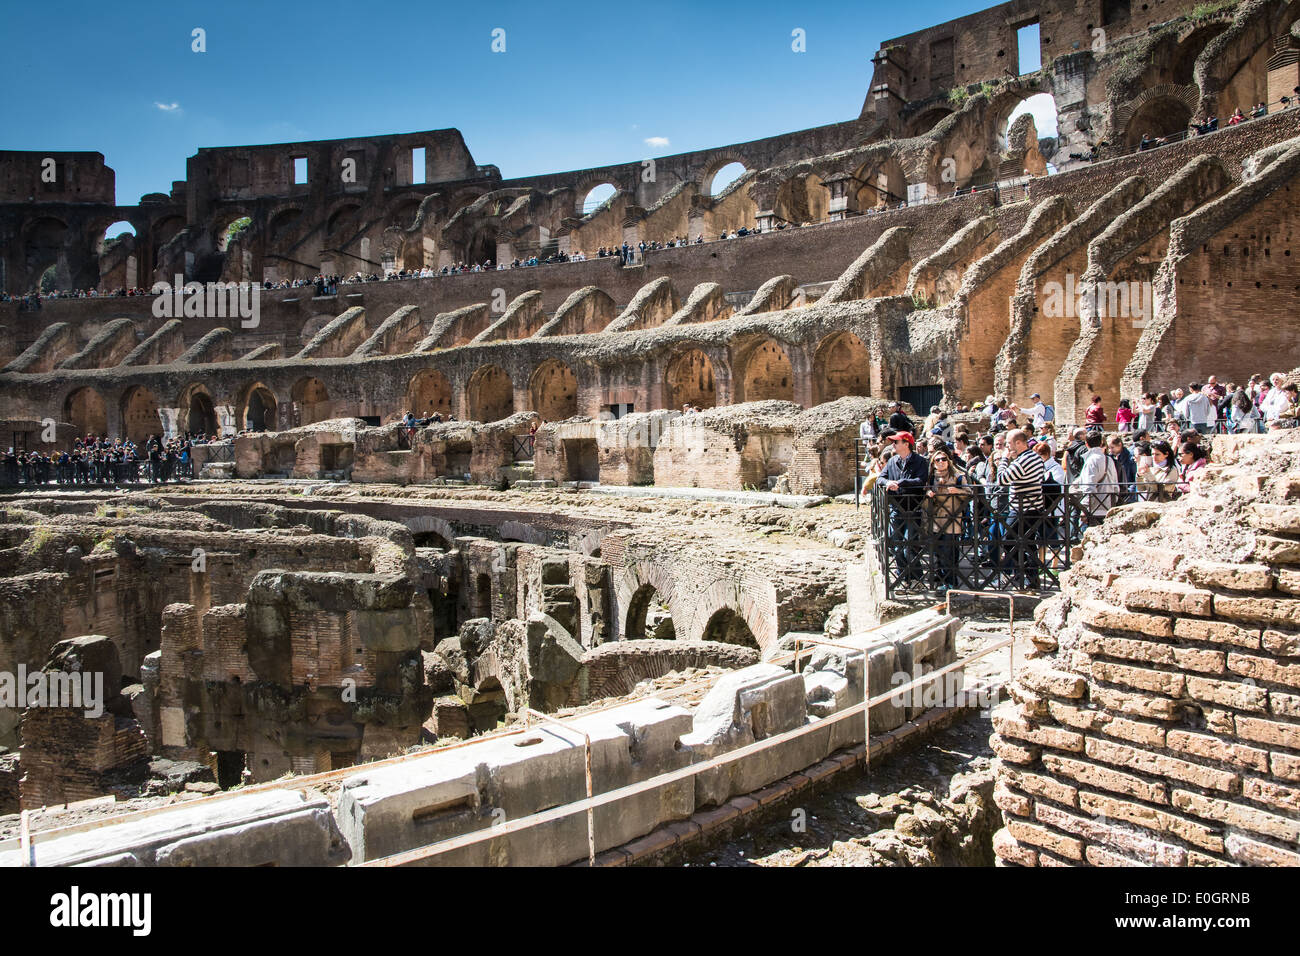 Rome,italy-April 17,2014:people admire the interior of the ancient roman coliseum in the sunny day Stock Photo